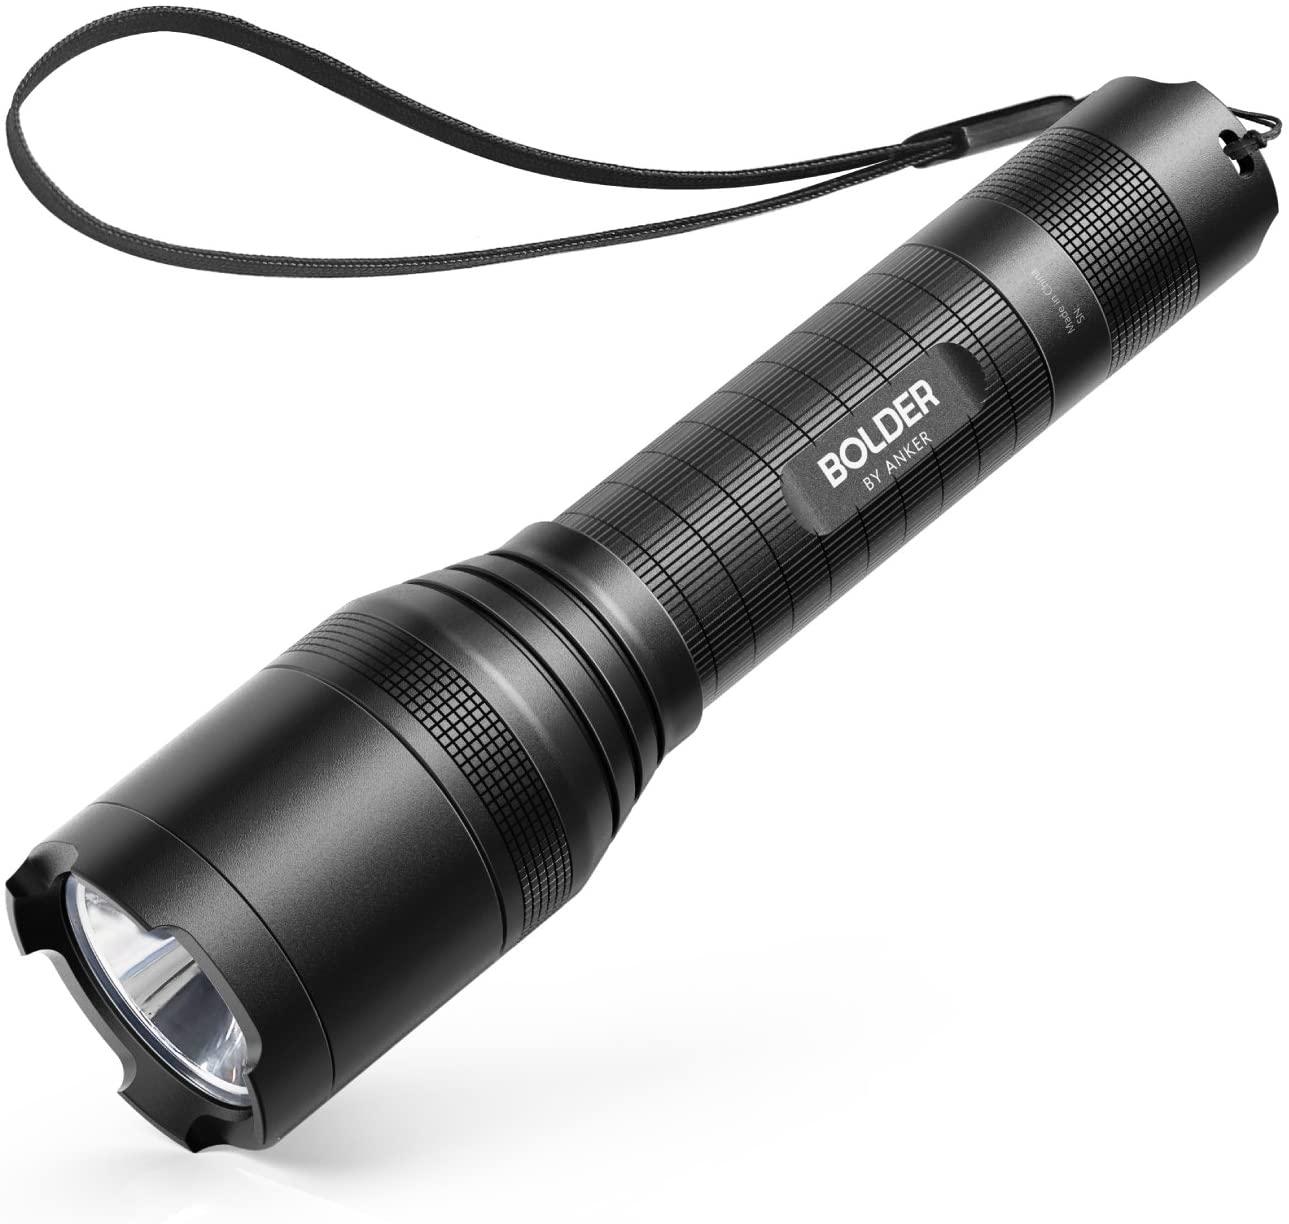 Anker Bolder LC90 900 Lumens Rechargeable Cree LED Flashlight for $22.99 Shipped